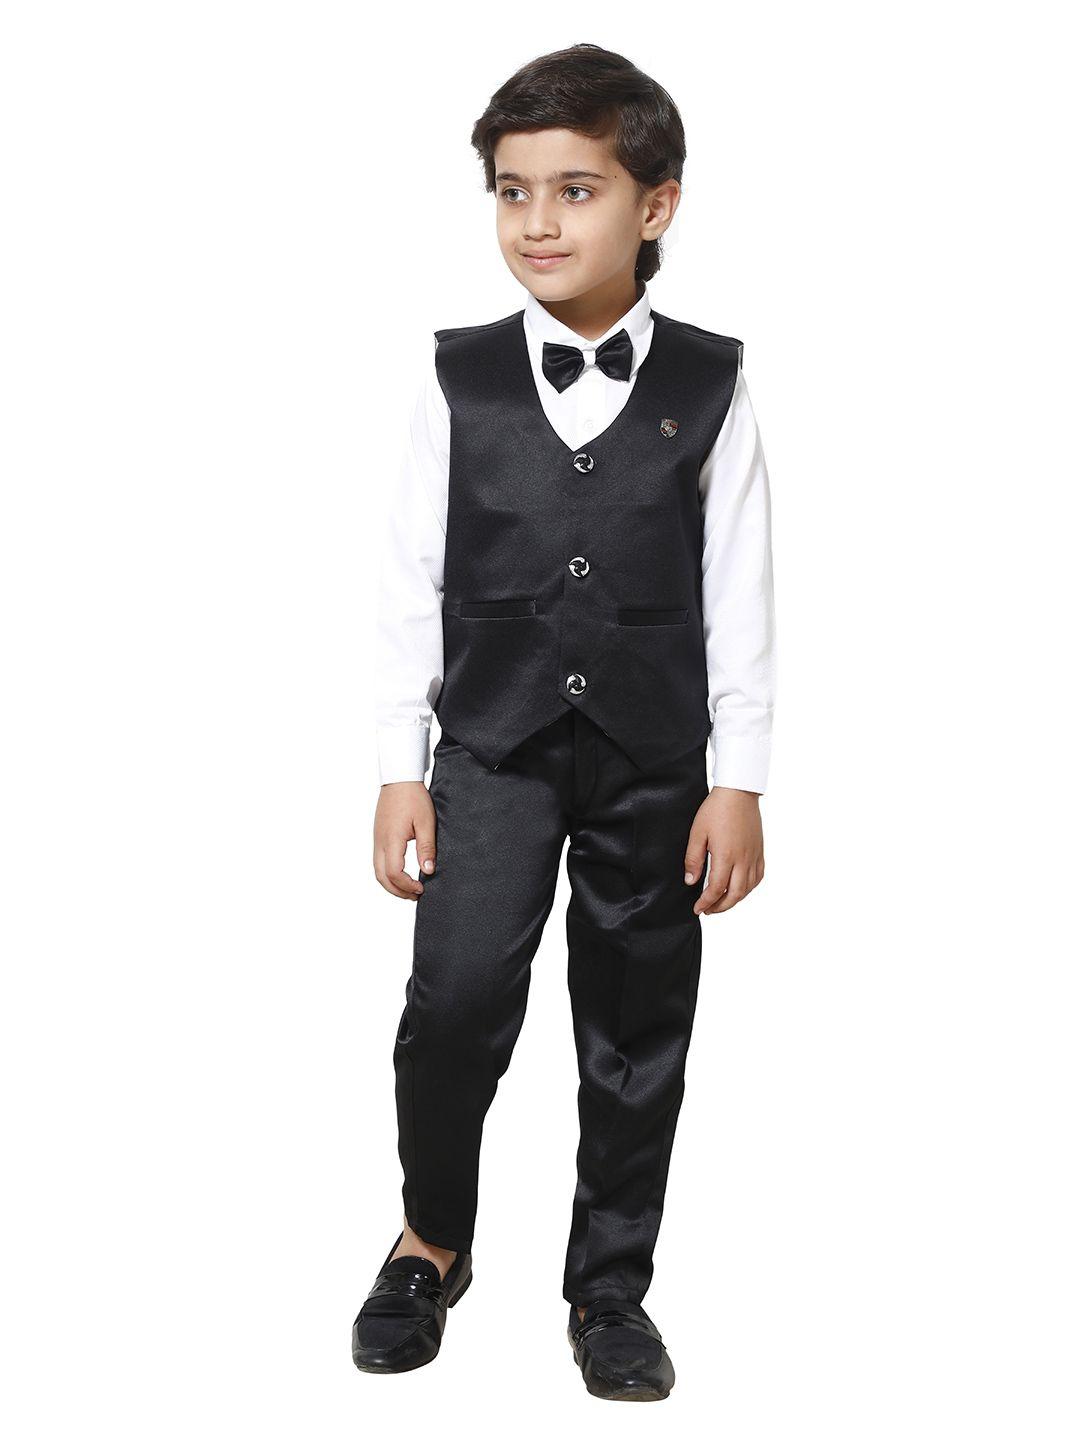 fourfolds-boys-black-&-white-solid-shirt-trouser-with-waistcoat